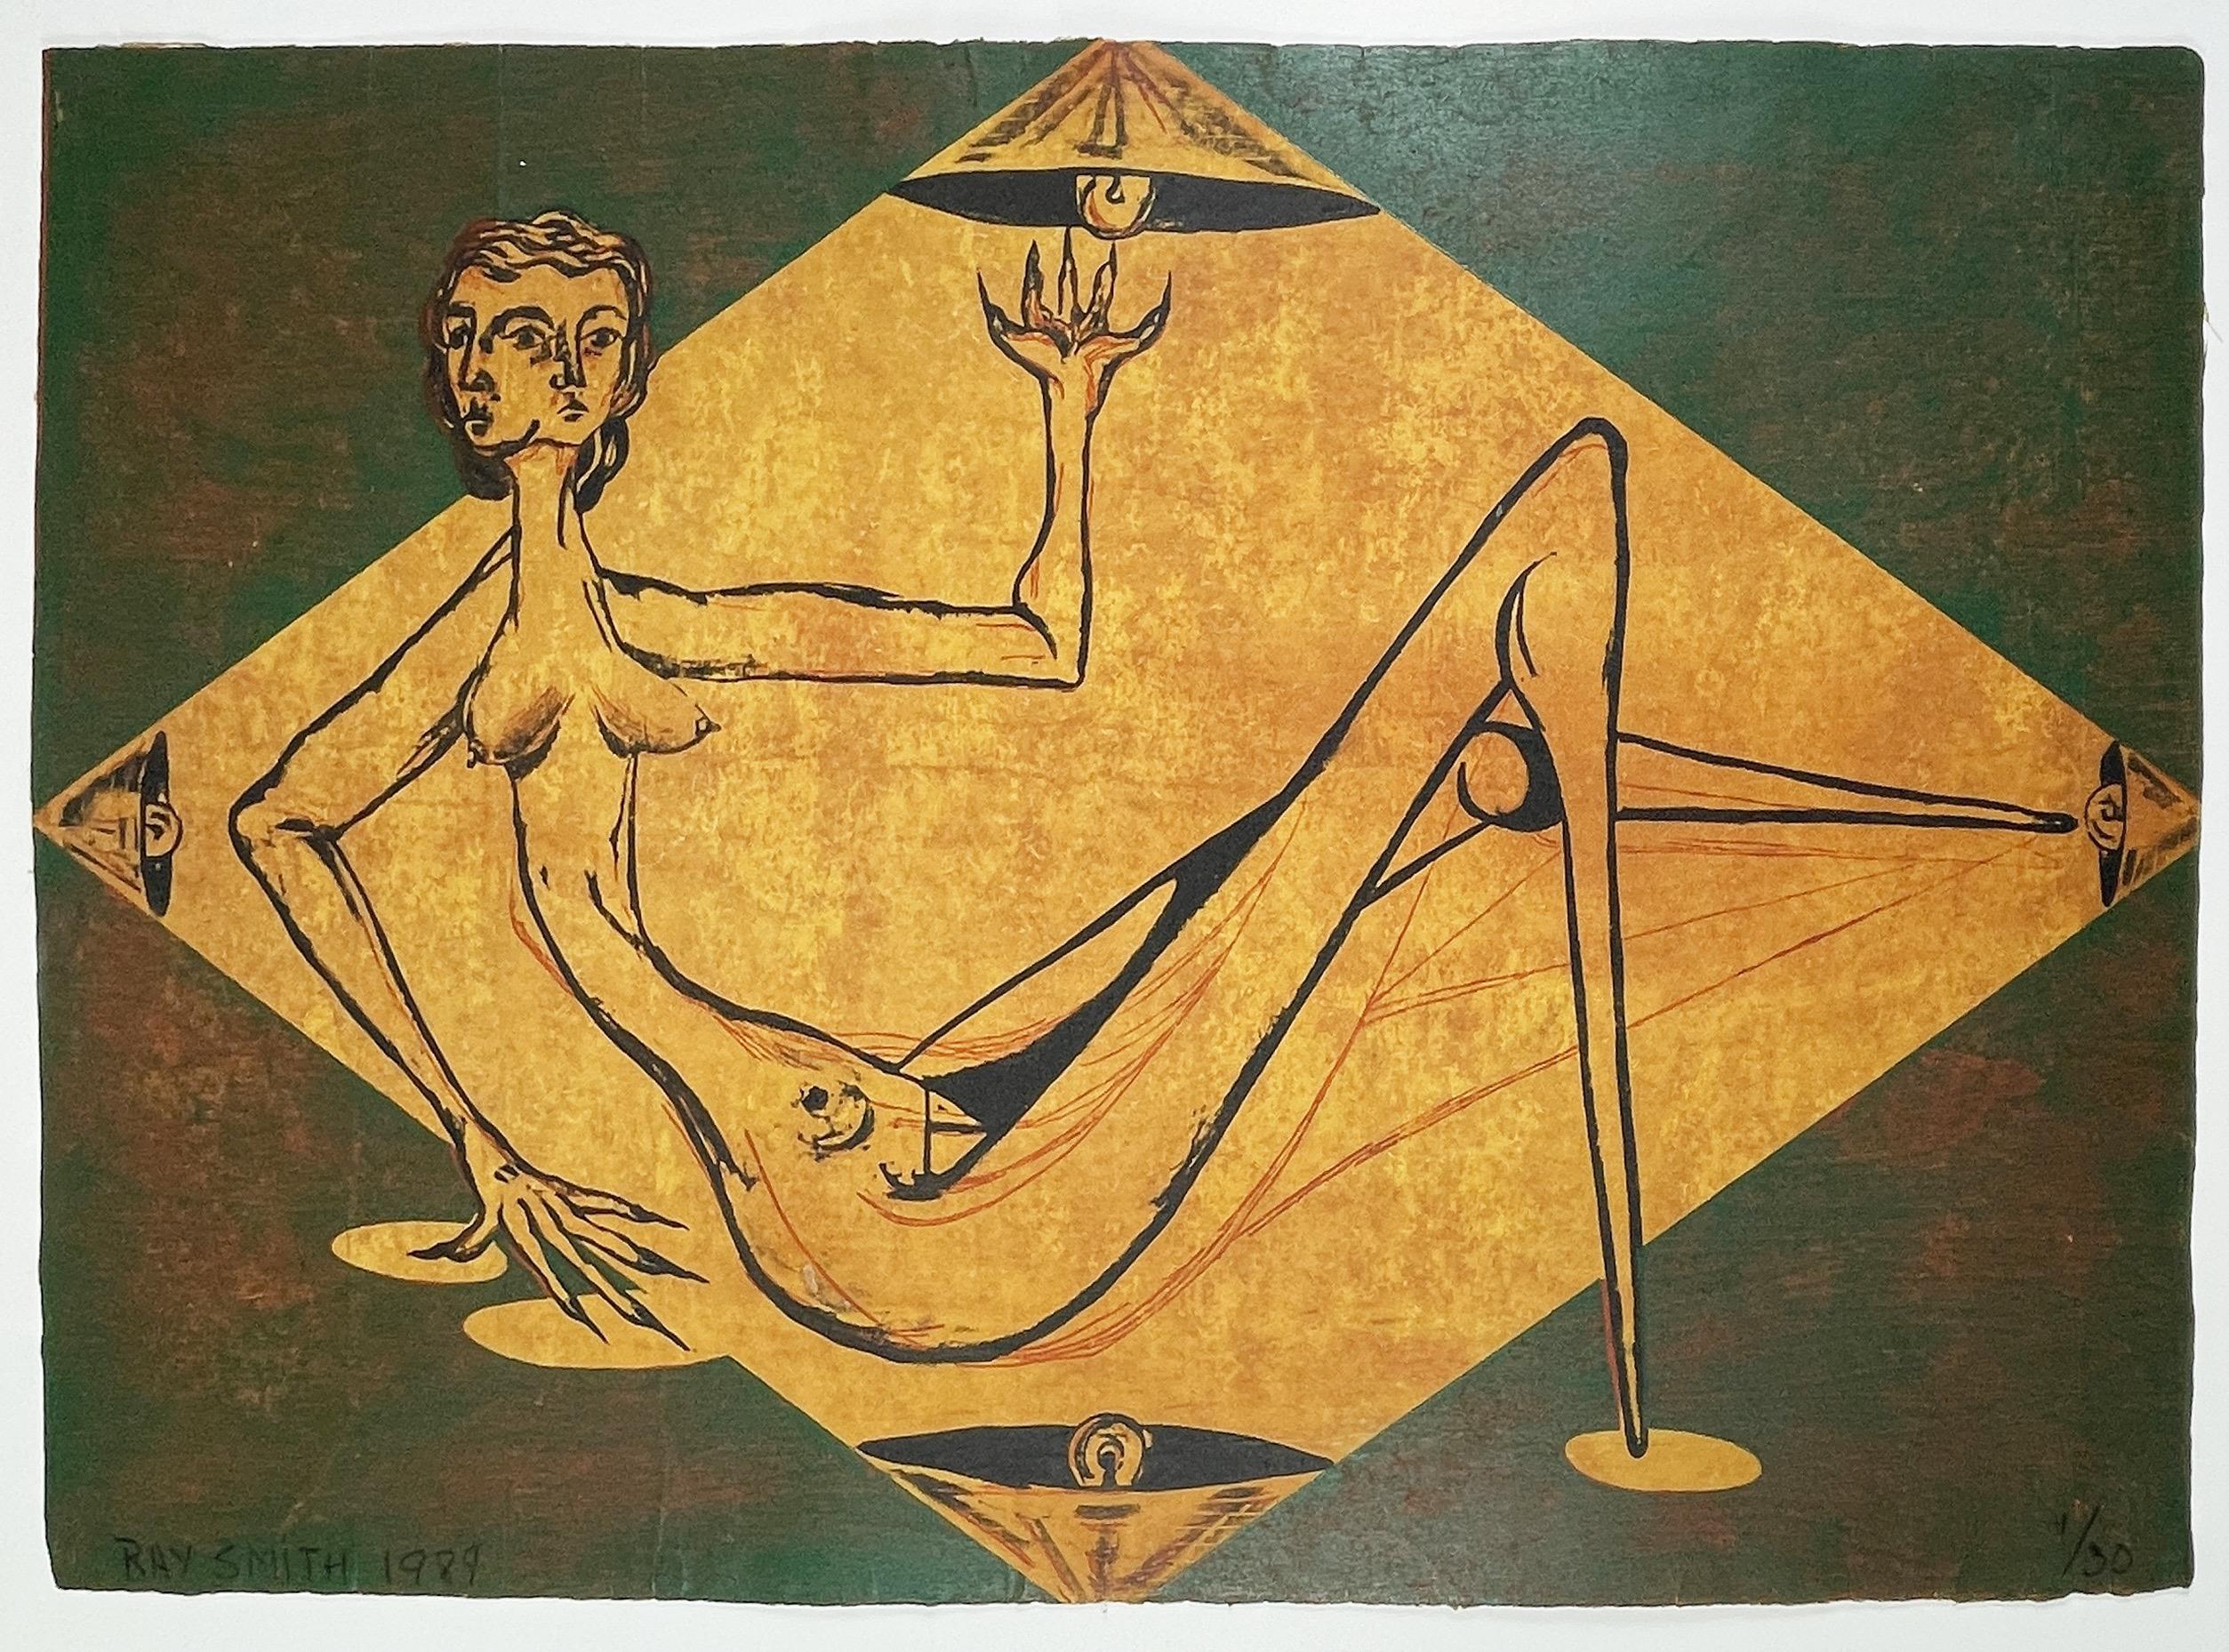 Ray Smith elucidates the "Dream of a Boy Scout" in this surreal green, red, and yellow wood cut print. A woman with two faces sits nude within a diamond-shaped gold field of color, reaching up with her hand and out with her leg to touch the corners